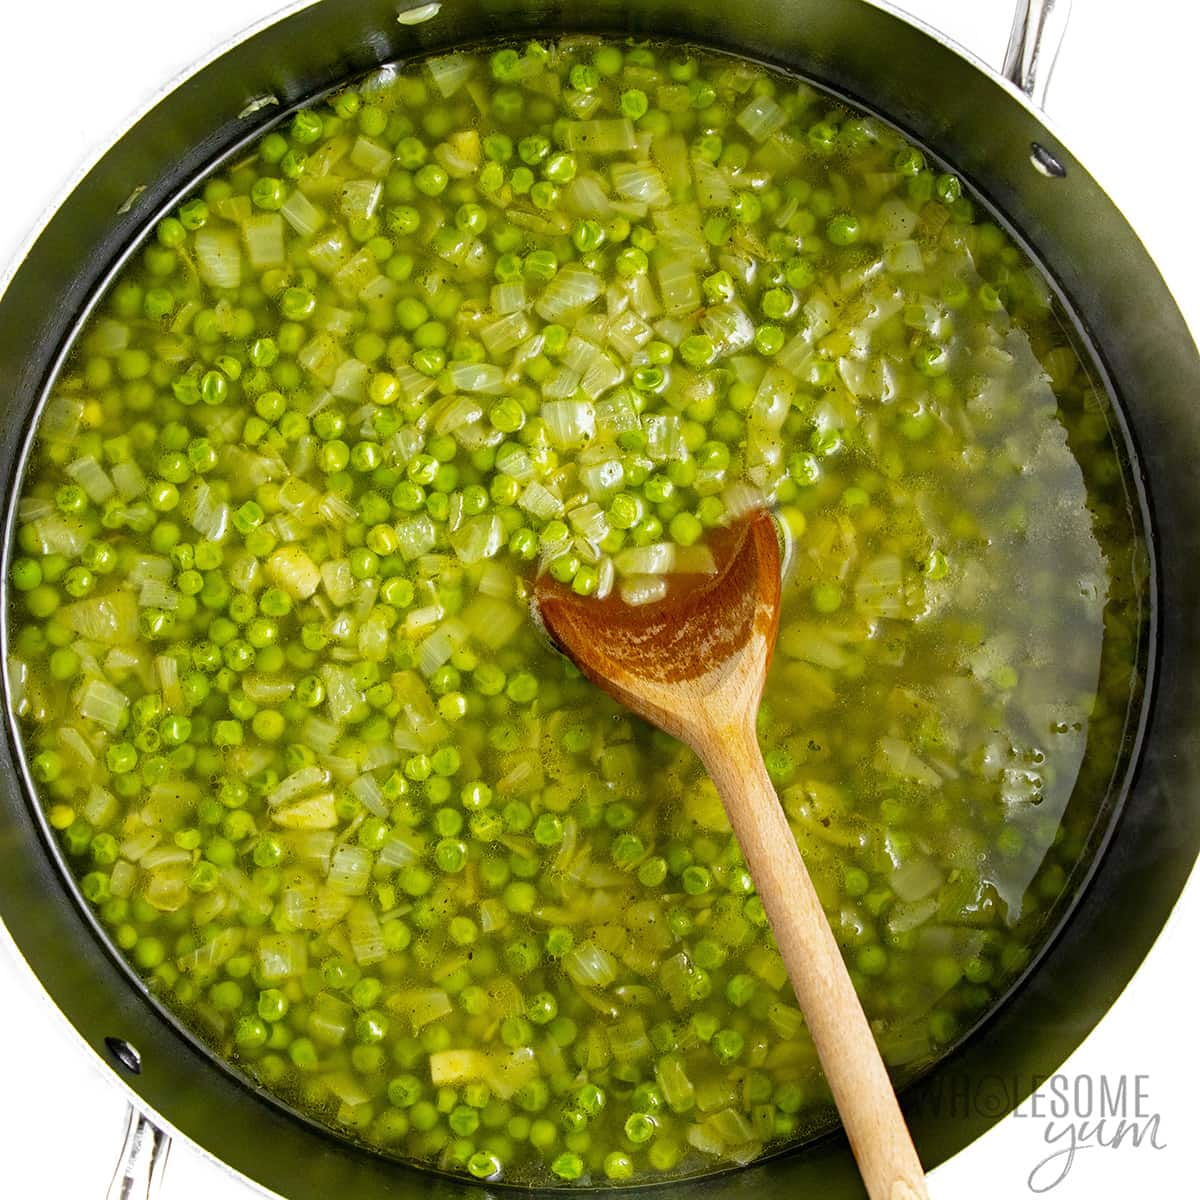 Add peas and stock to skillet.